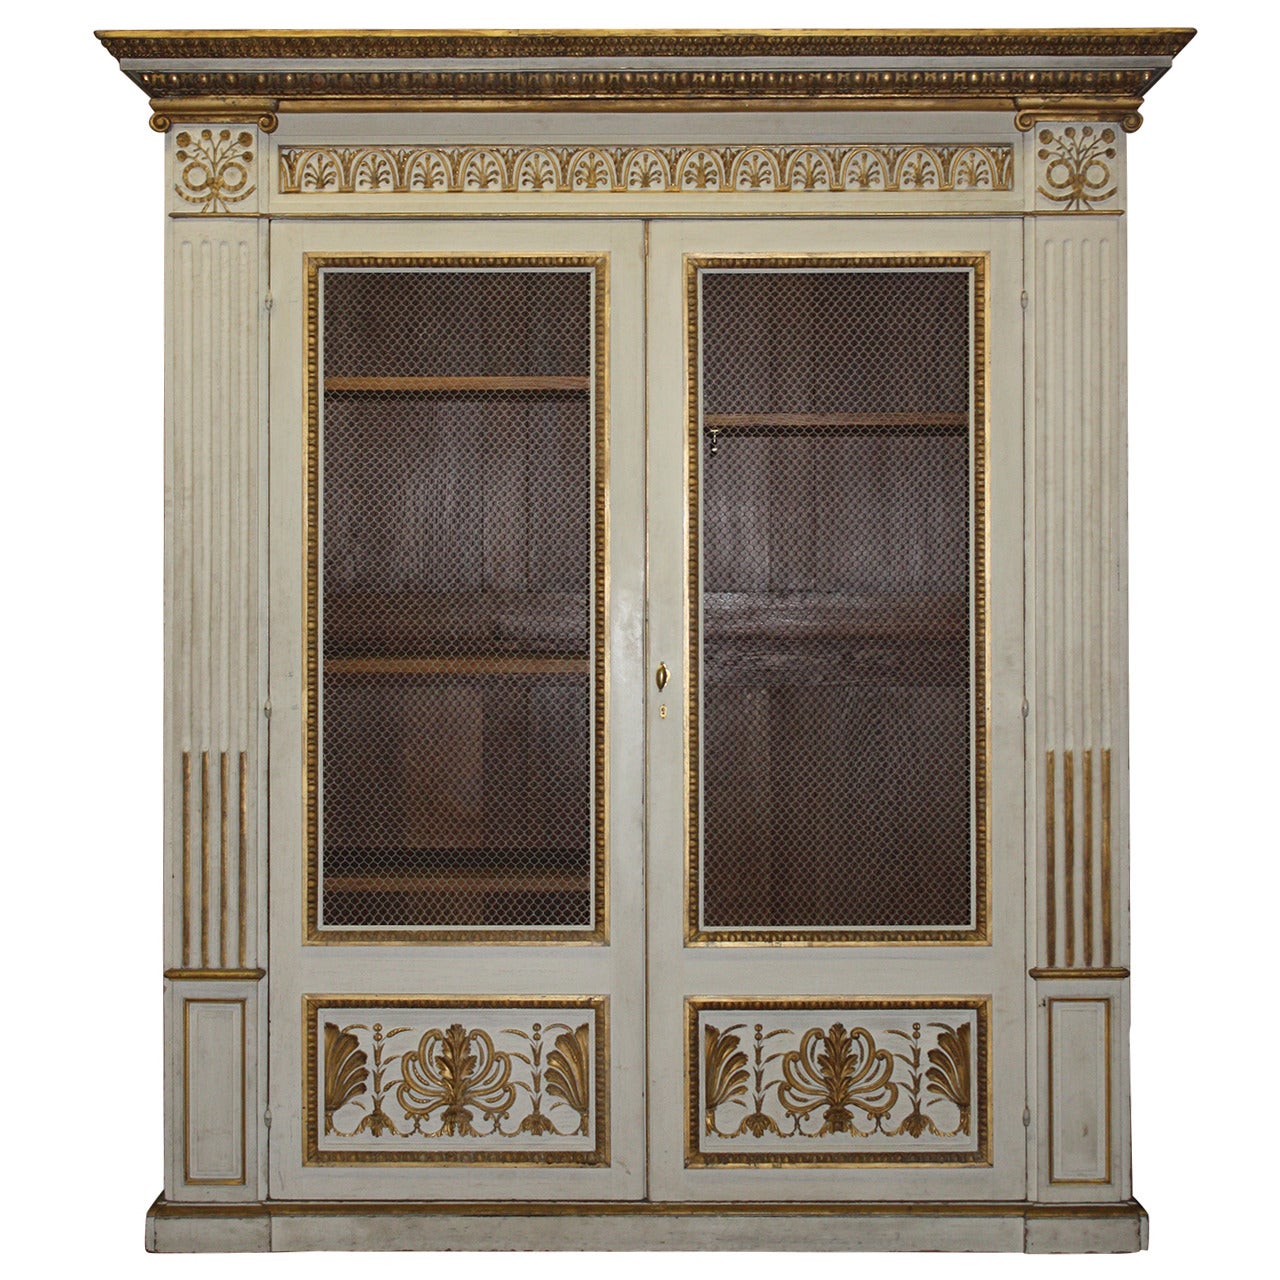 Exceptional Painted and Gilt Wardrobe